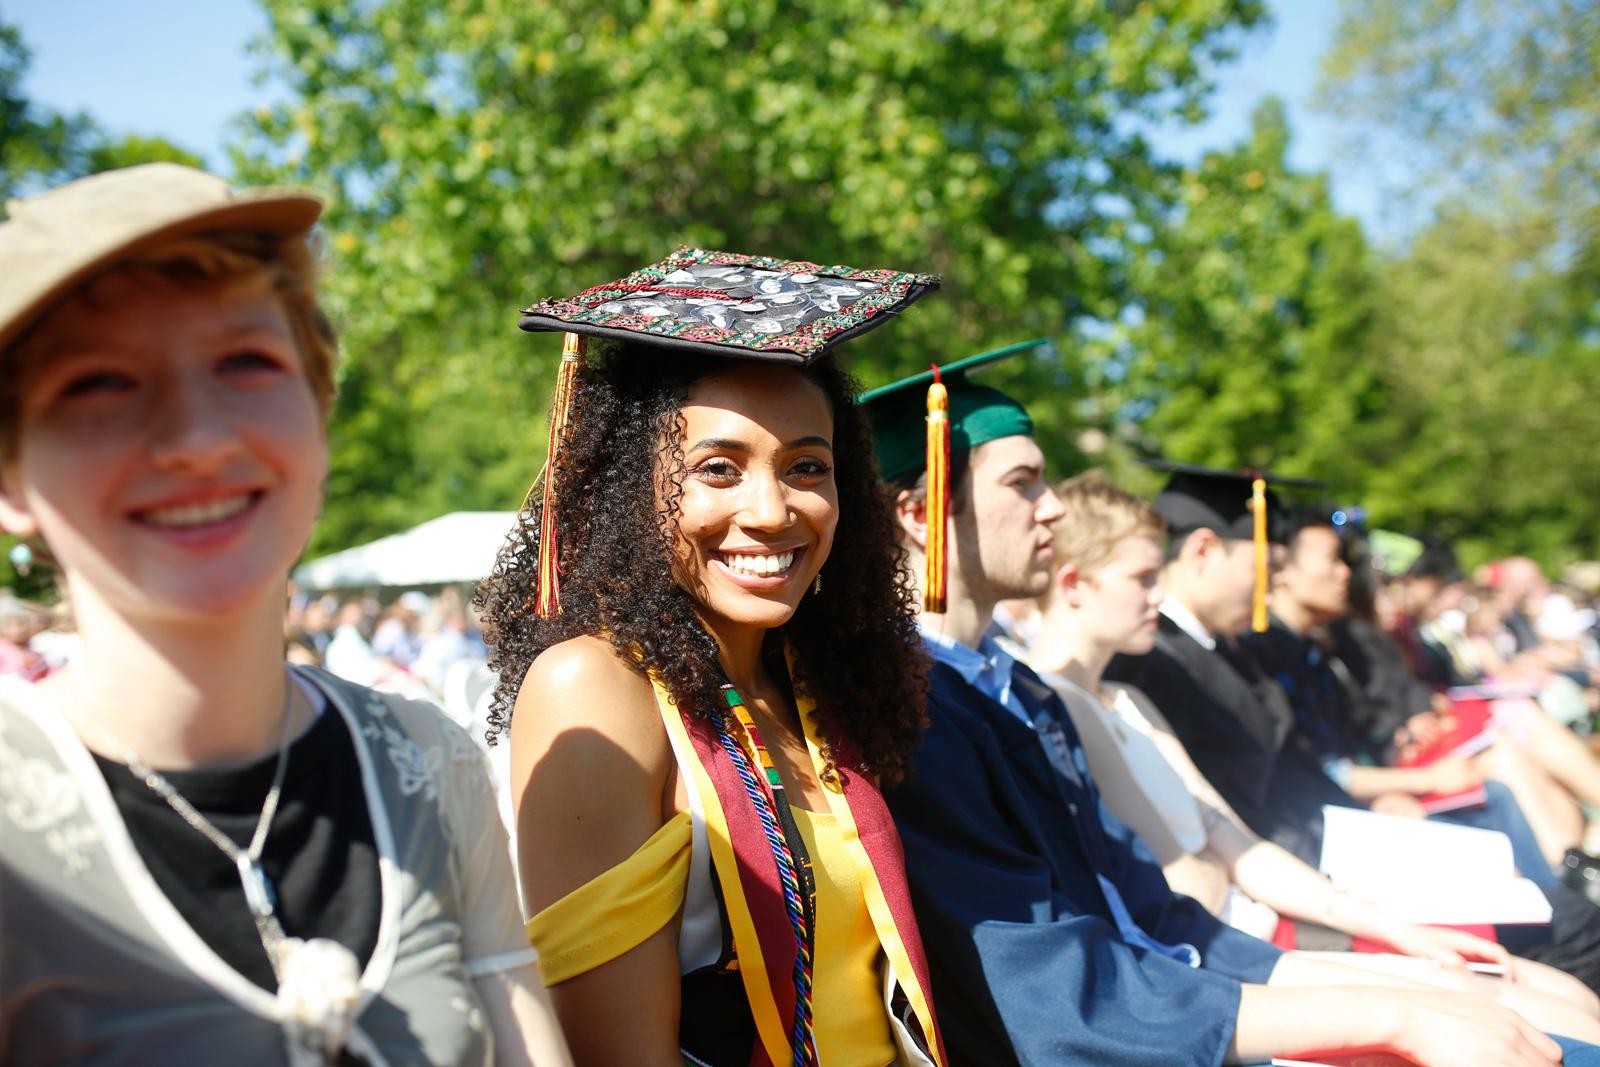 A smiling student in cap and gown at graduation.